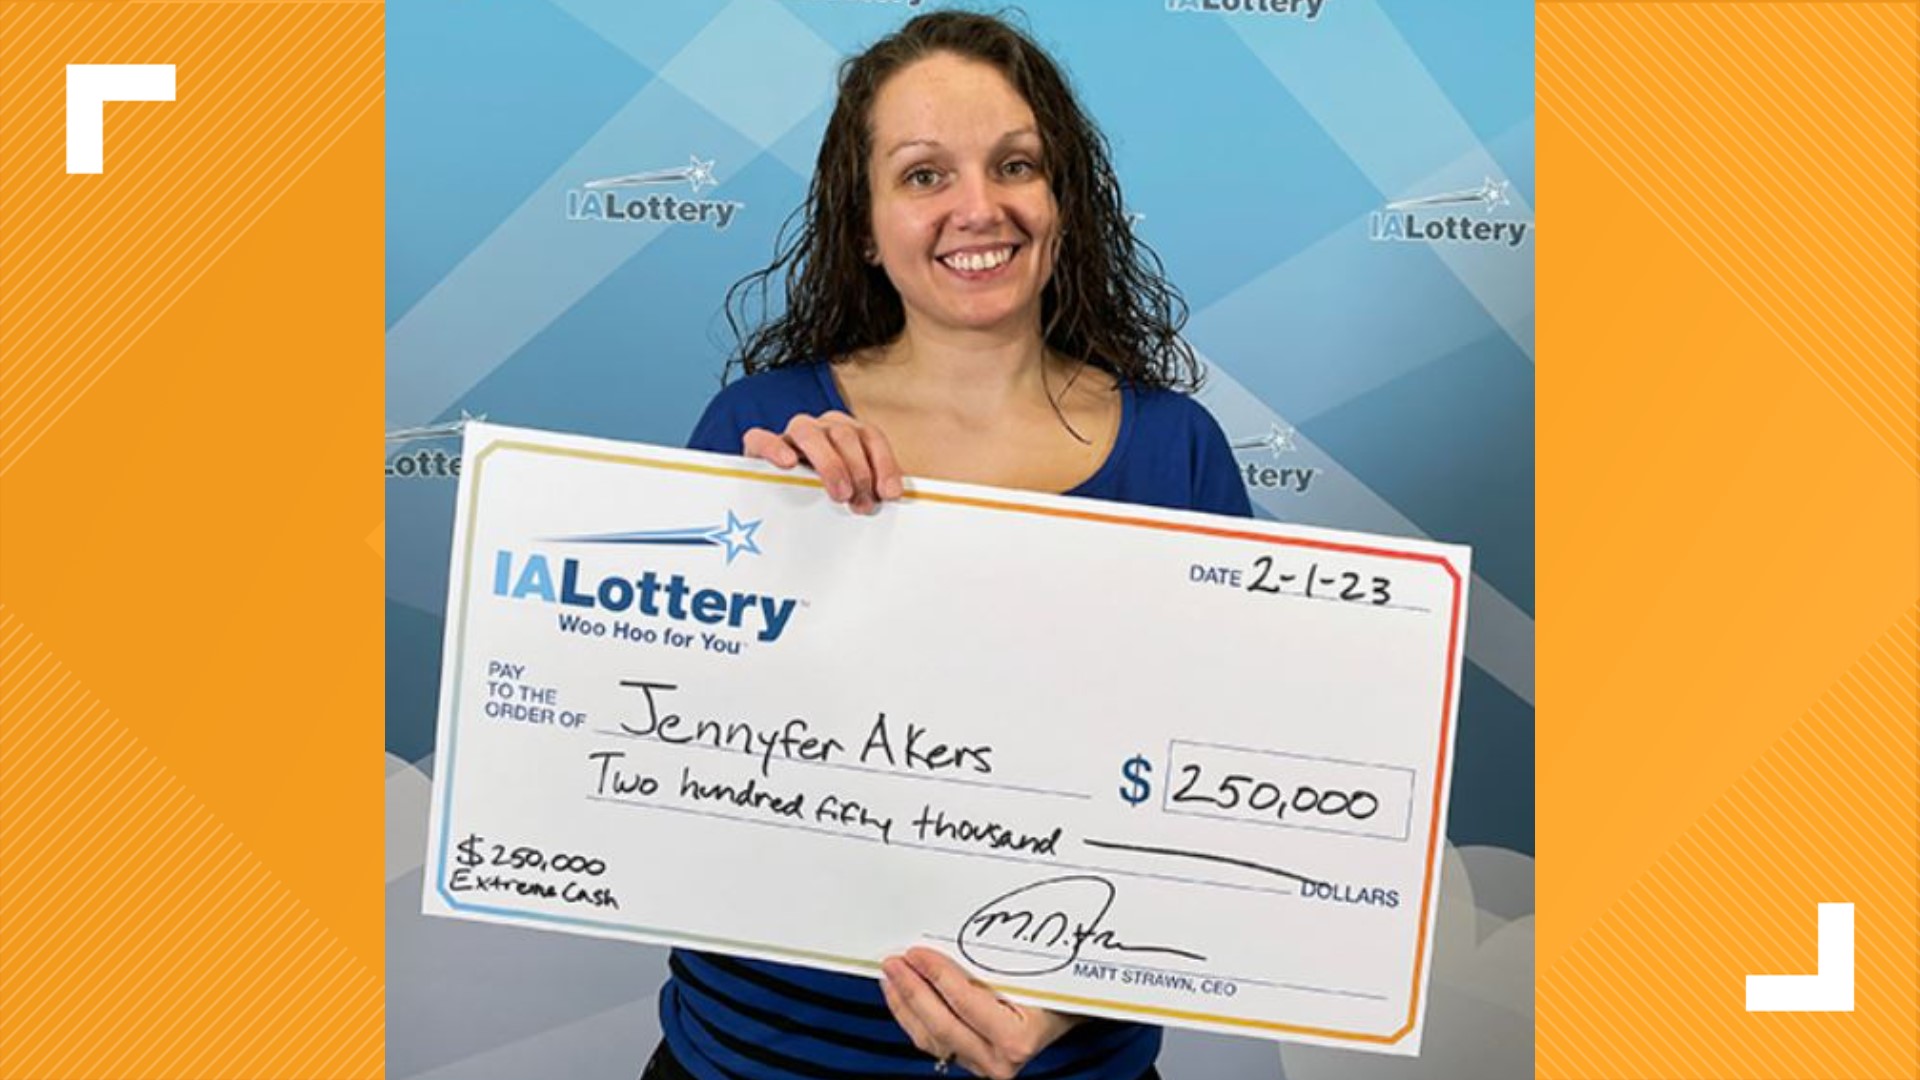 31-year-old Jennyfer Akers bought a pair of scratch tickets from a self-service kiosk at the Price Chopper on Ingersoll Avenue.